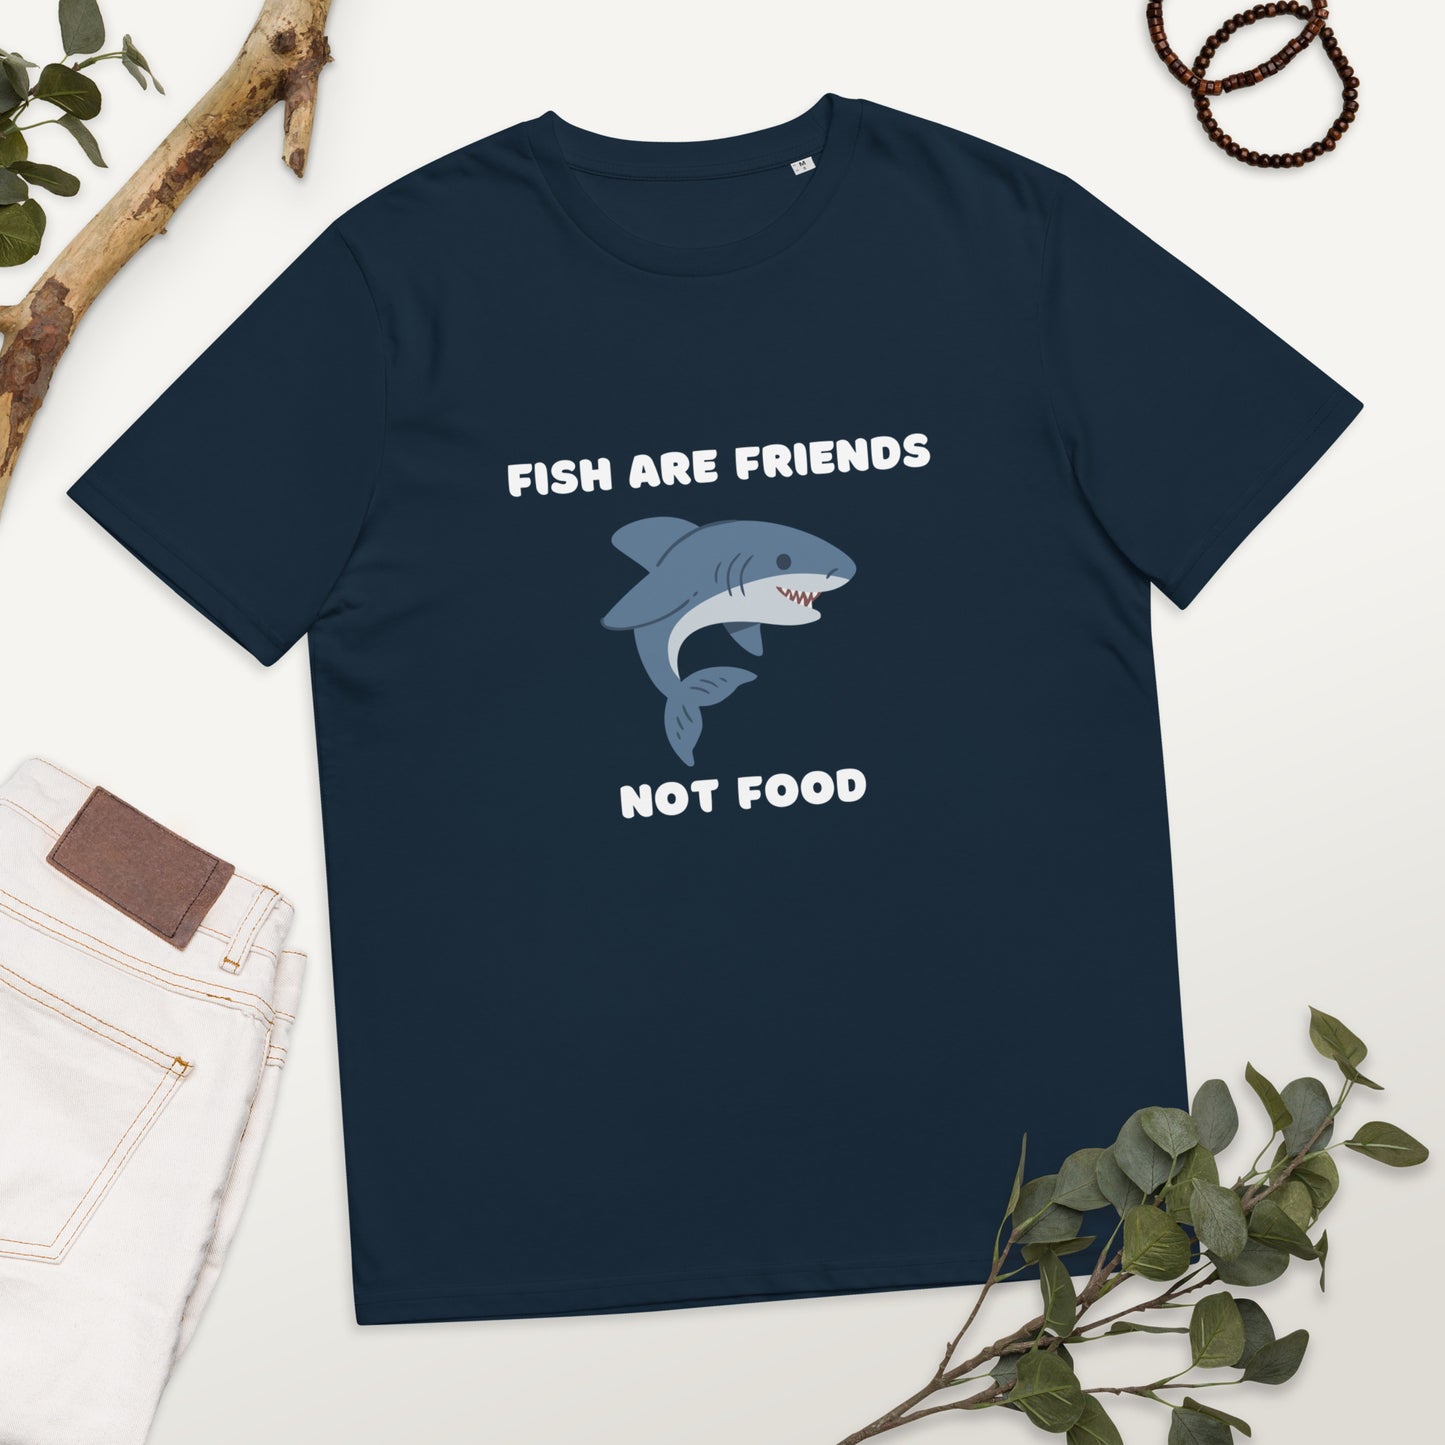 Fish are Friends Not Food - Unisex organic cotton t-shirt